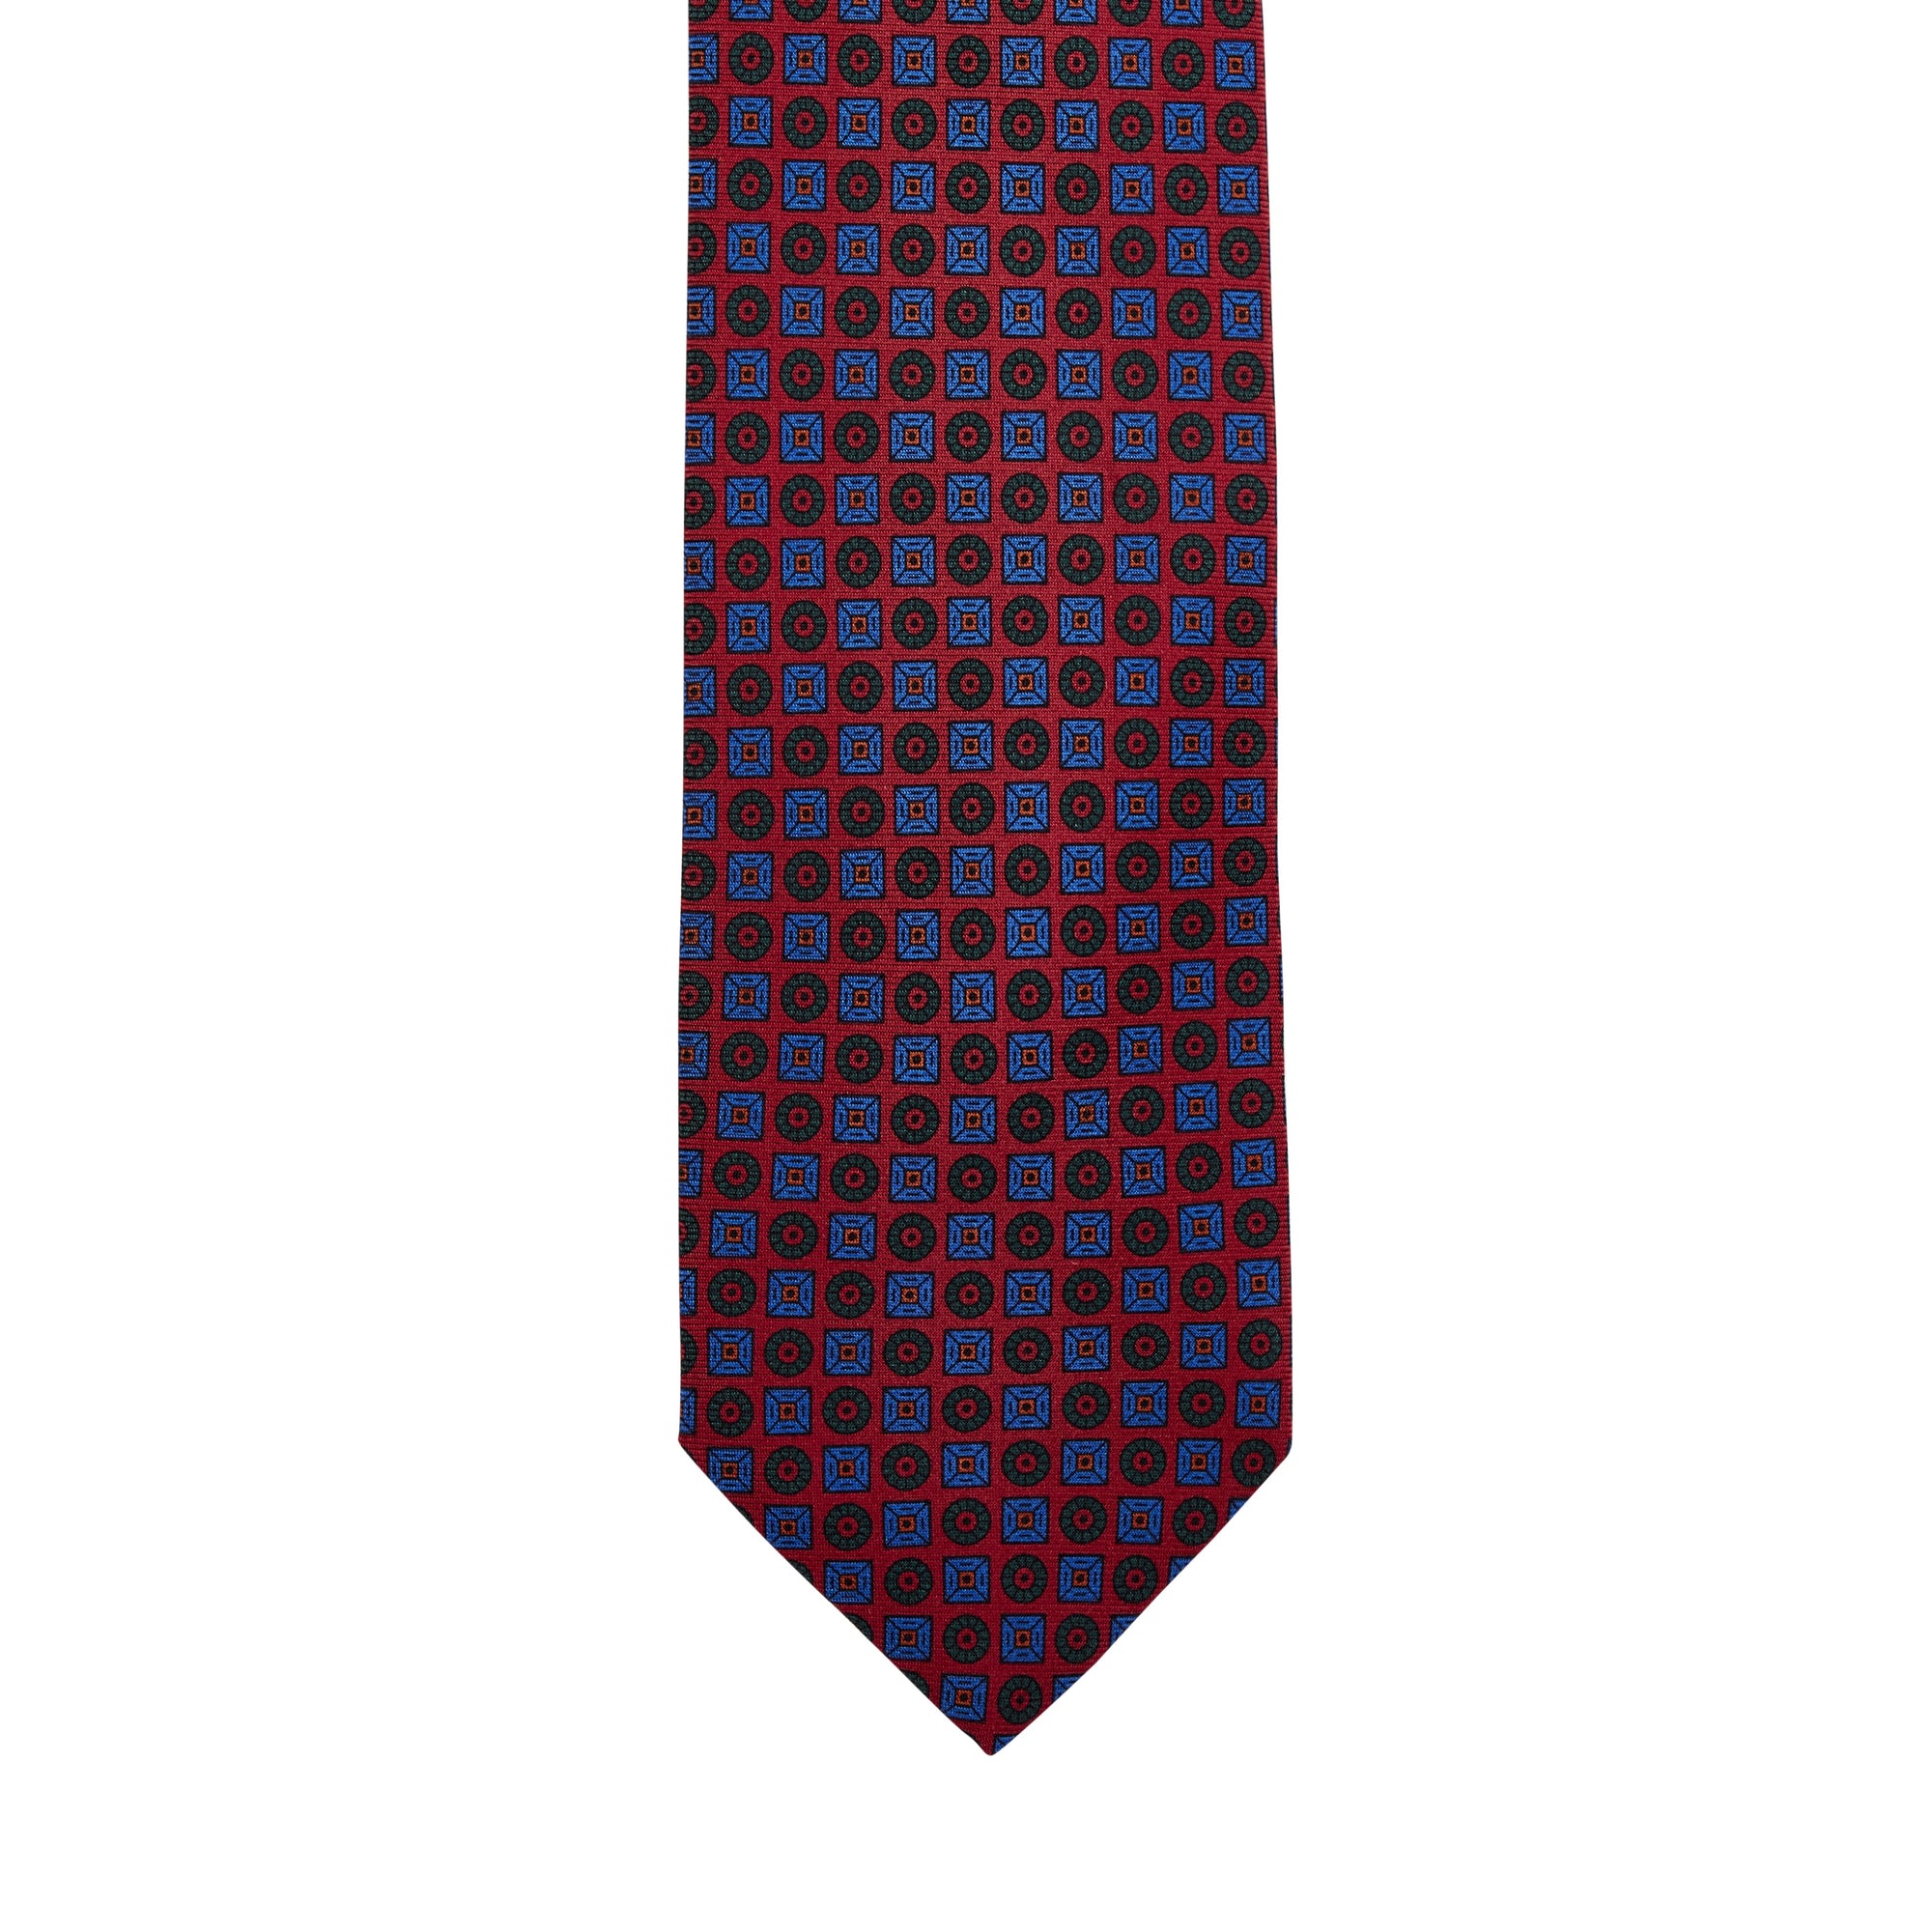 A quality Sovereign Grade Rust Ancient Madder Tie in red and blue on a white background, from KirbyAllison.com.